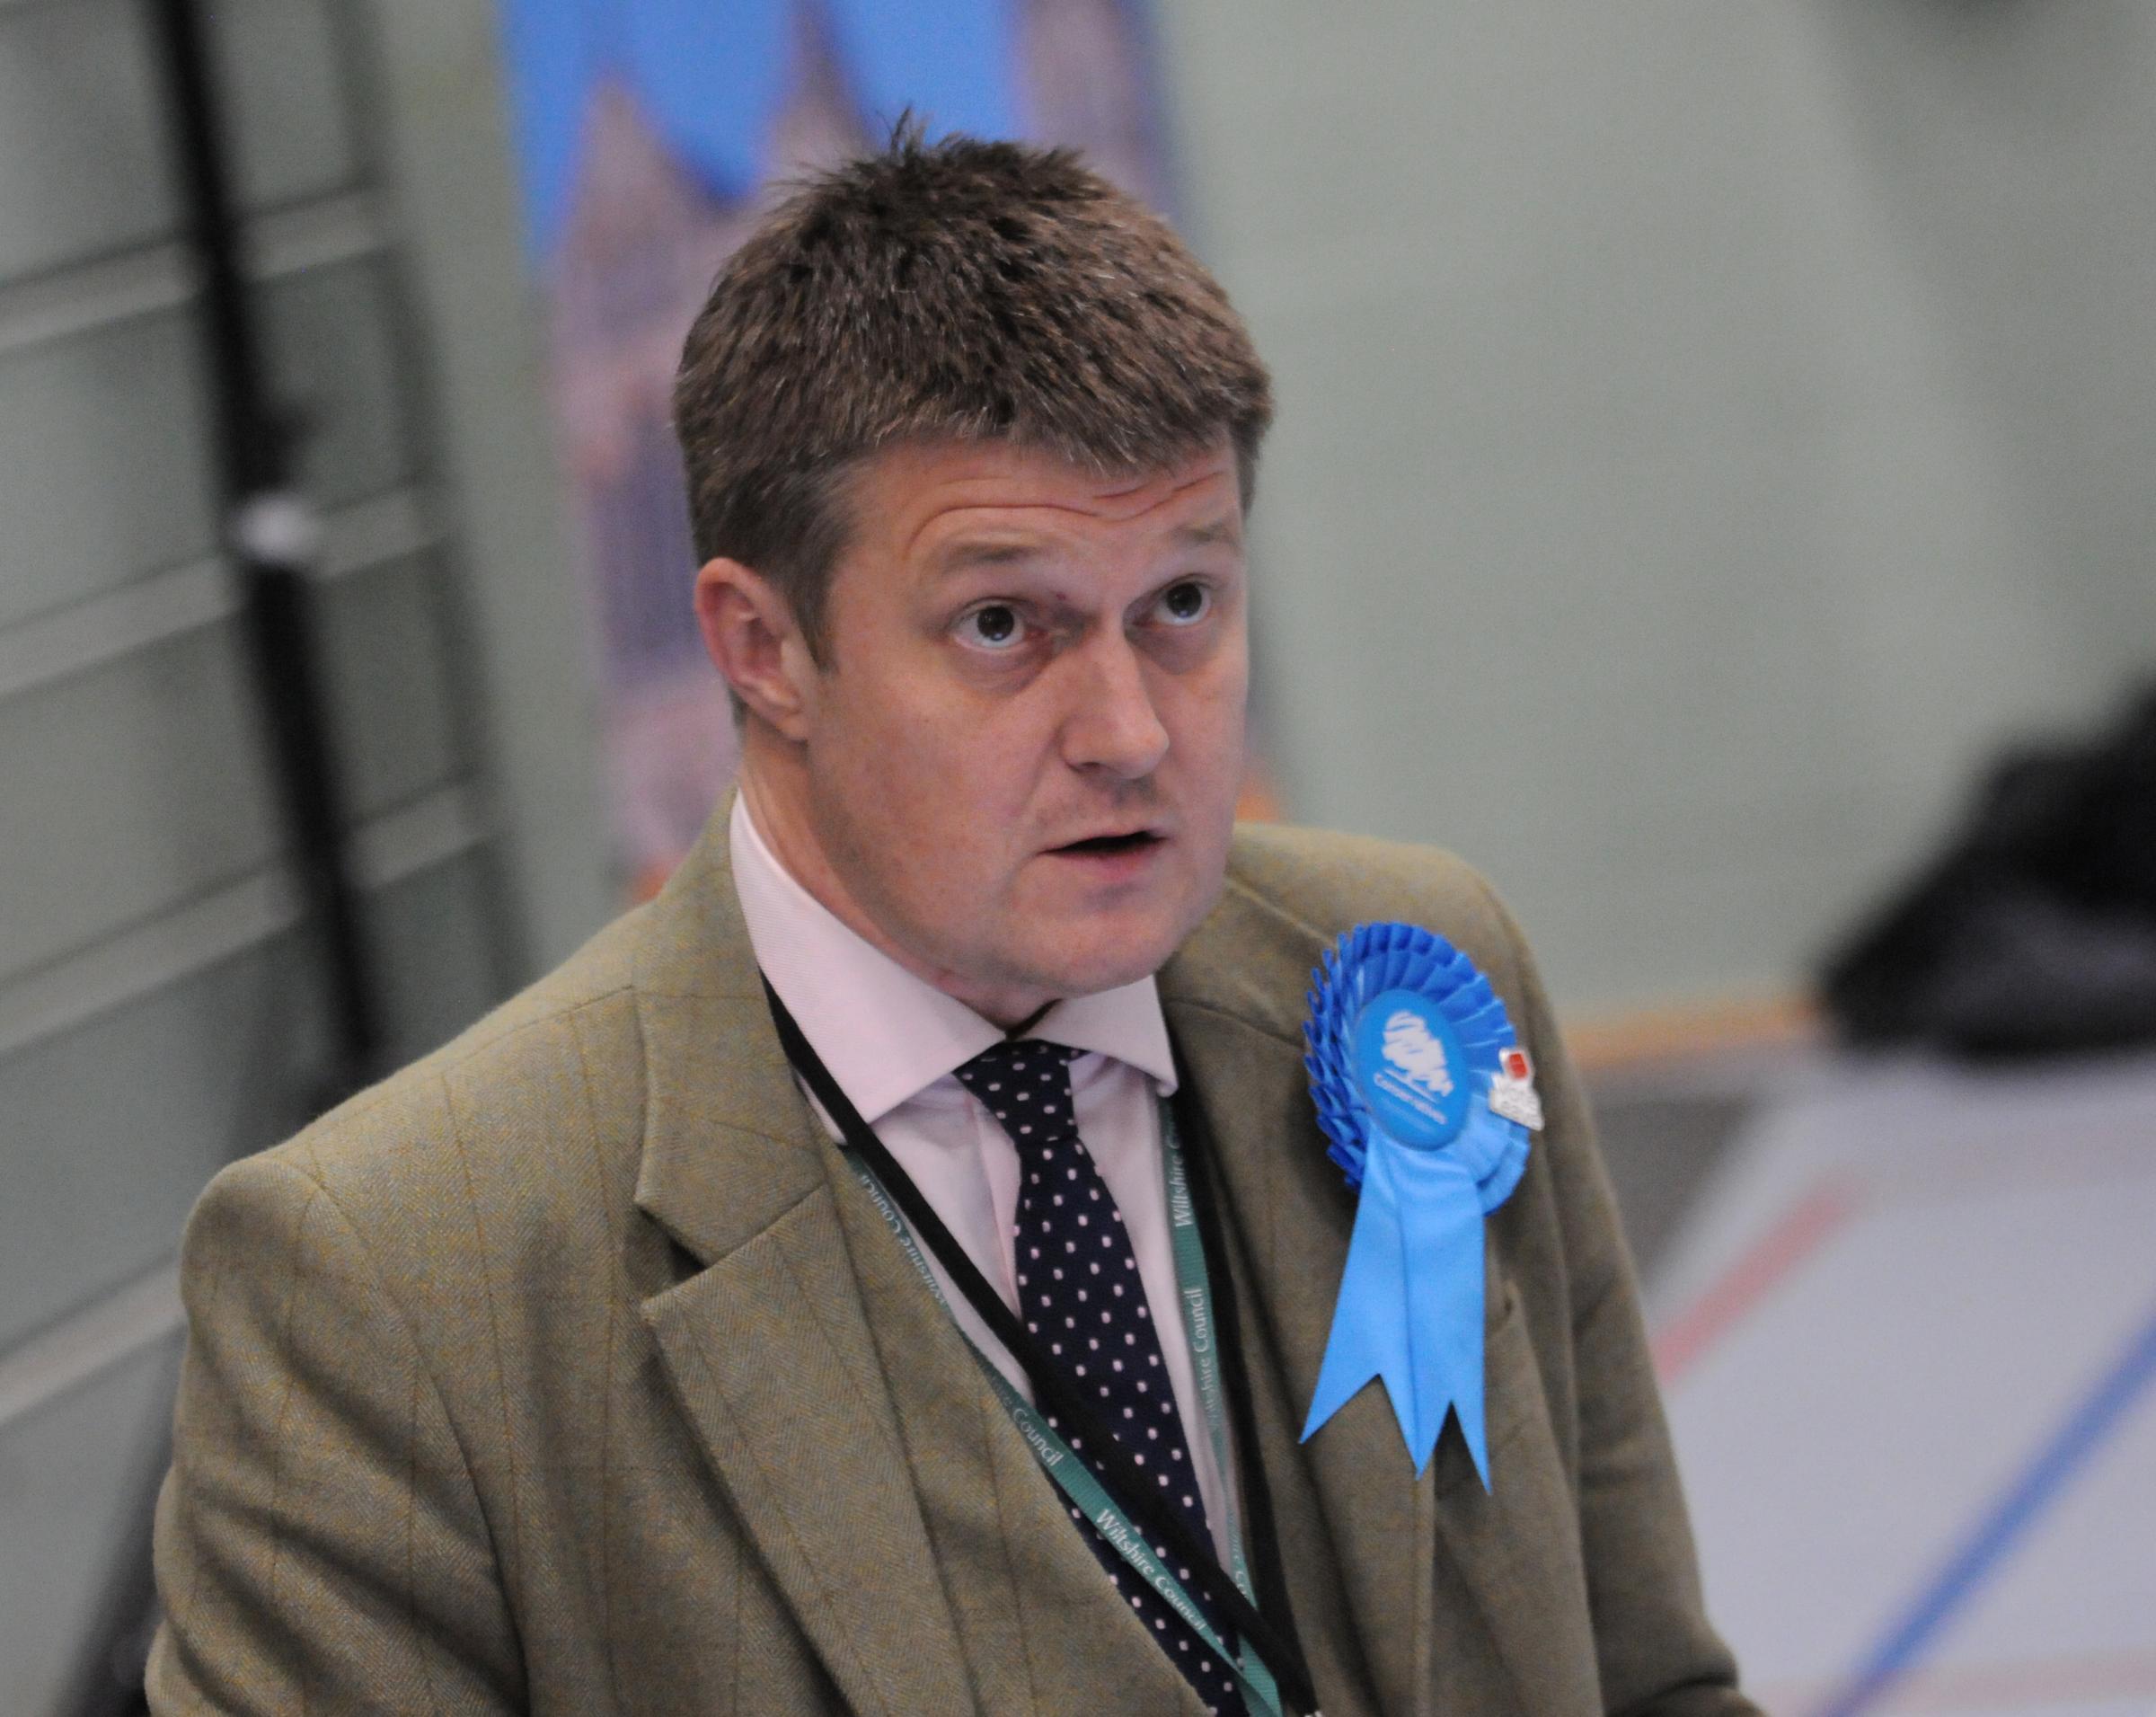 Cllr Richard Clewer..Election count for Salisbury Constituency and Devizes Constituency, held at Five Rivers Leisure Centre in Salisbury..General Election 2019 DC9356P87 Picture by Tom Gregory...